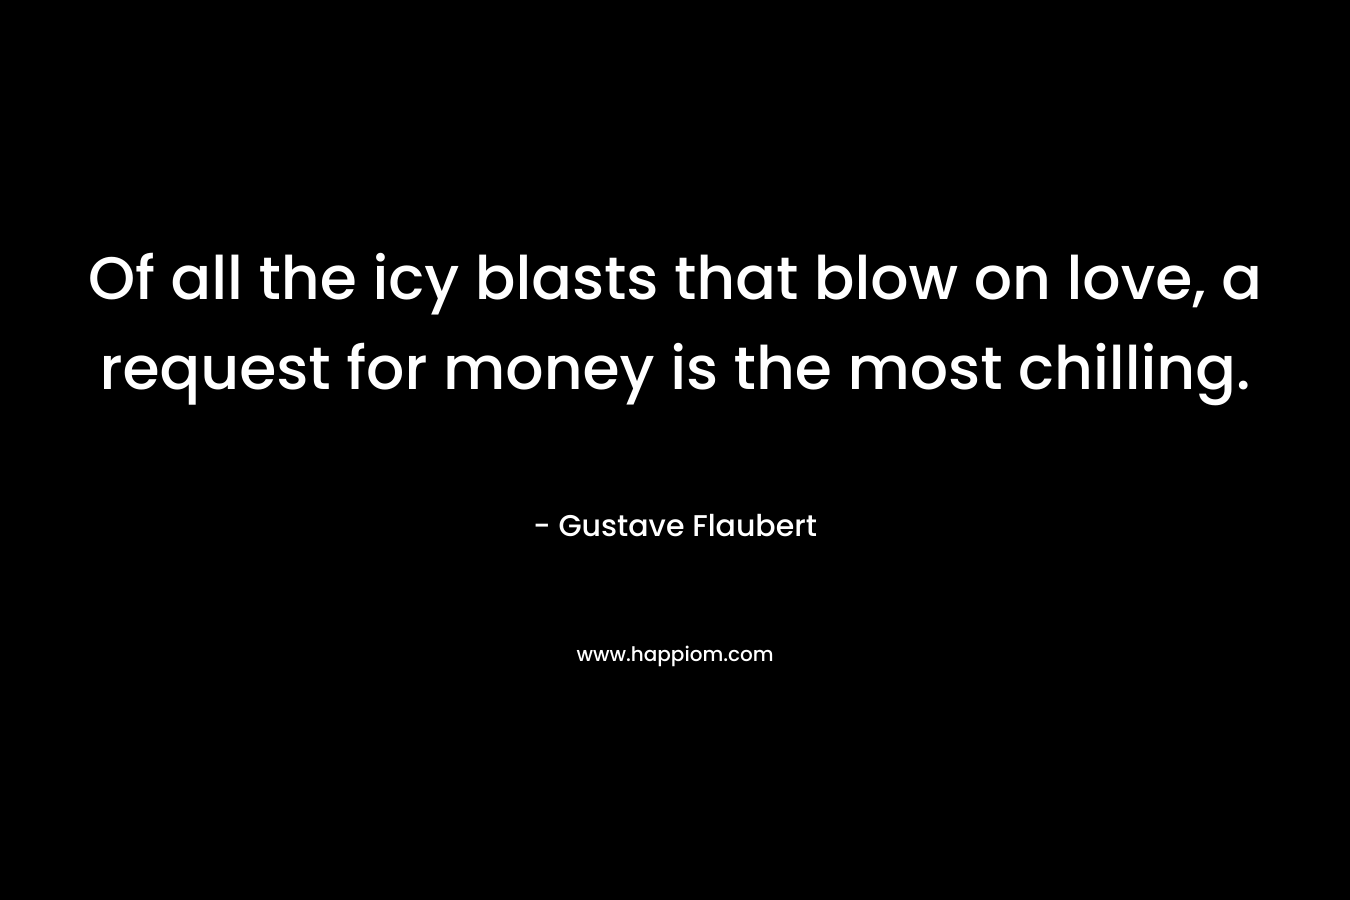 Of all the icy blasts that blow on love, a request for money is the most chilling. – Gustave Flaubert